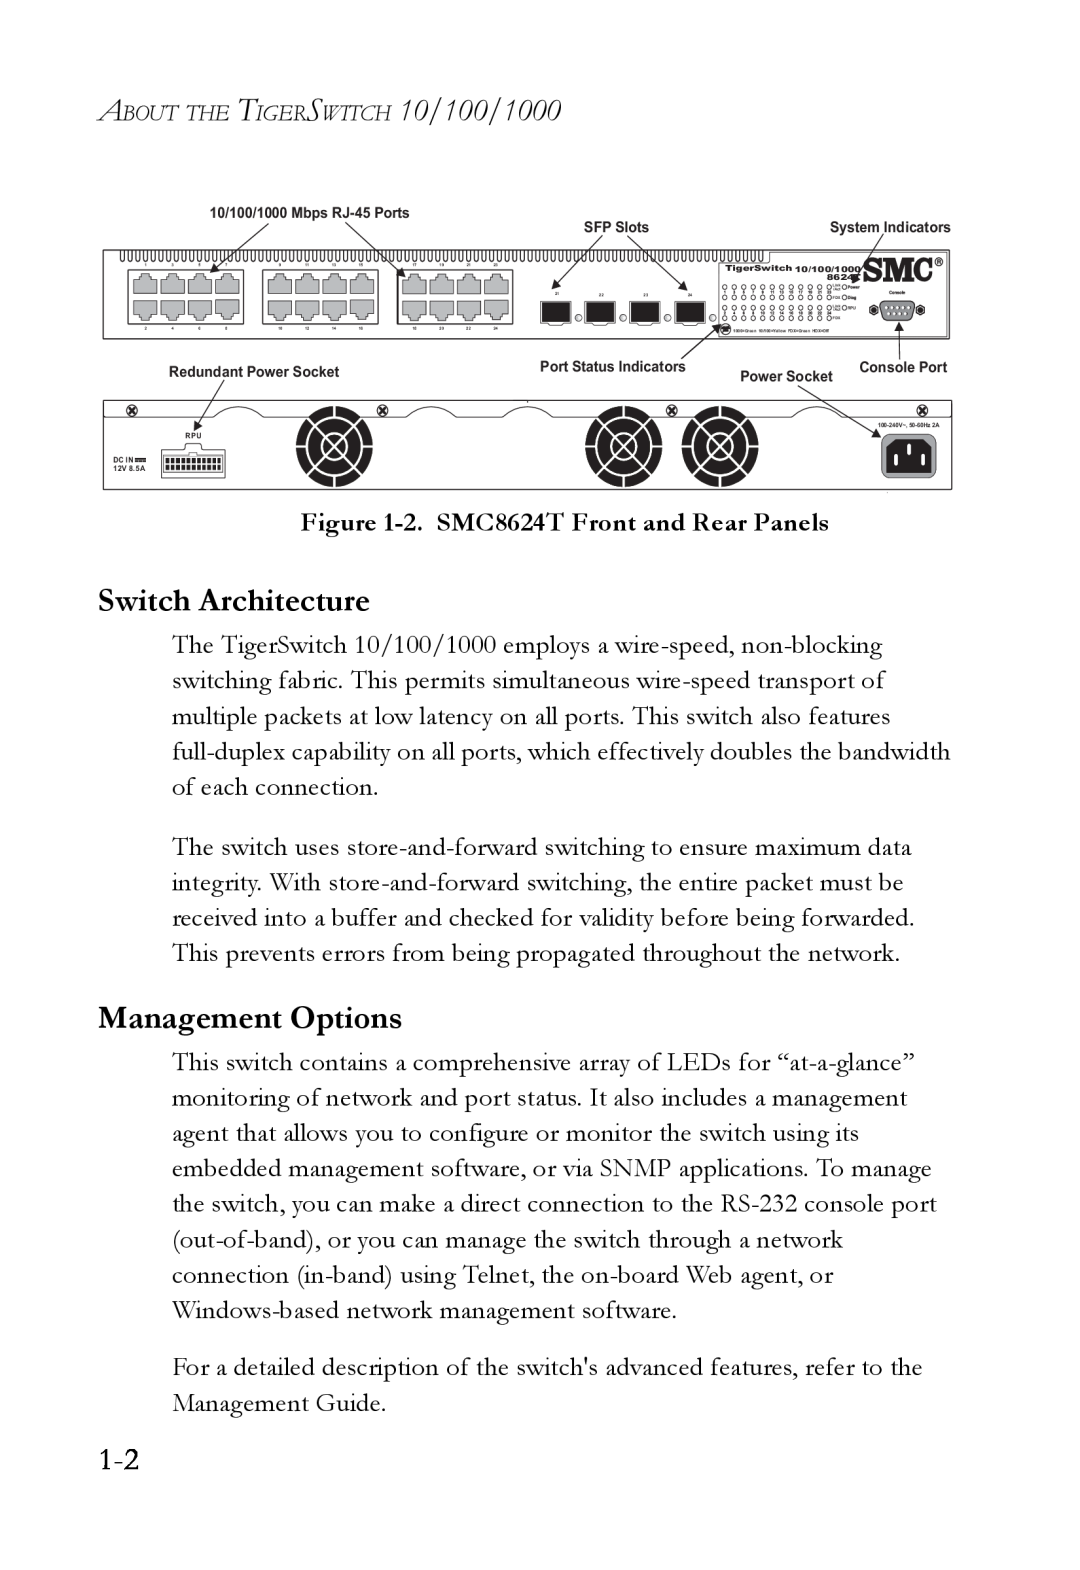 SMC Networks manual Switch Architecture, Management Options, 2. SMC8624T Front and Rear Panels 